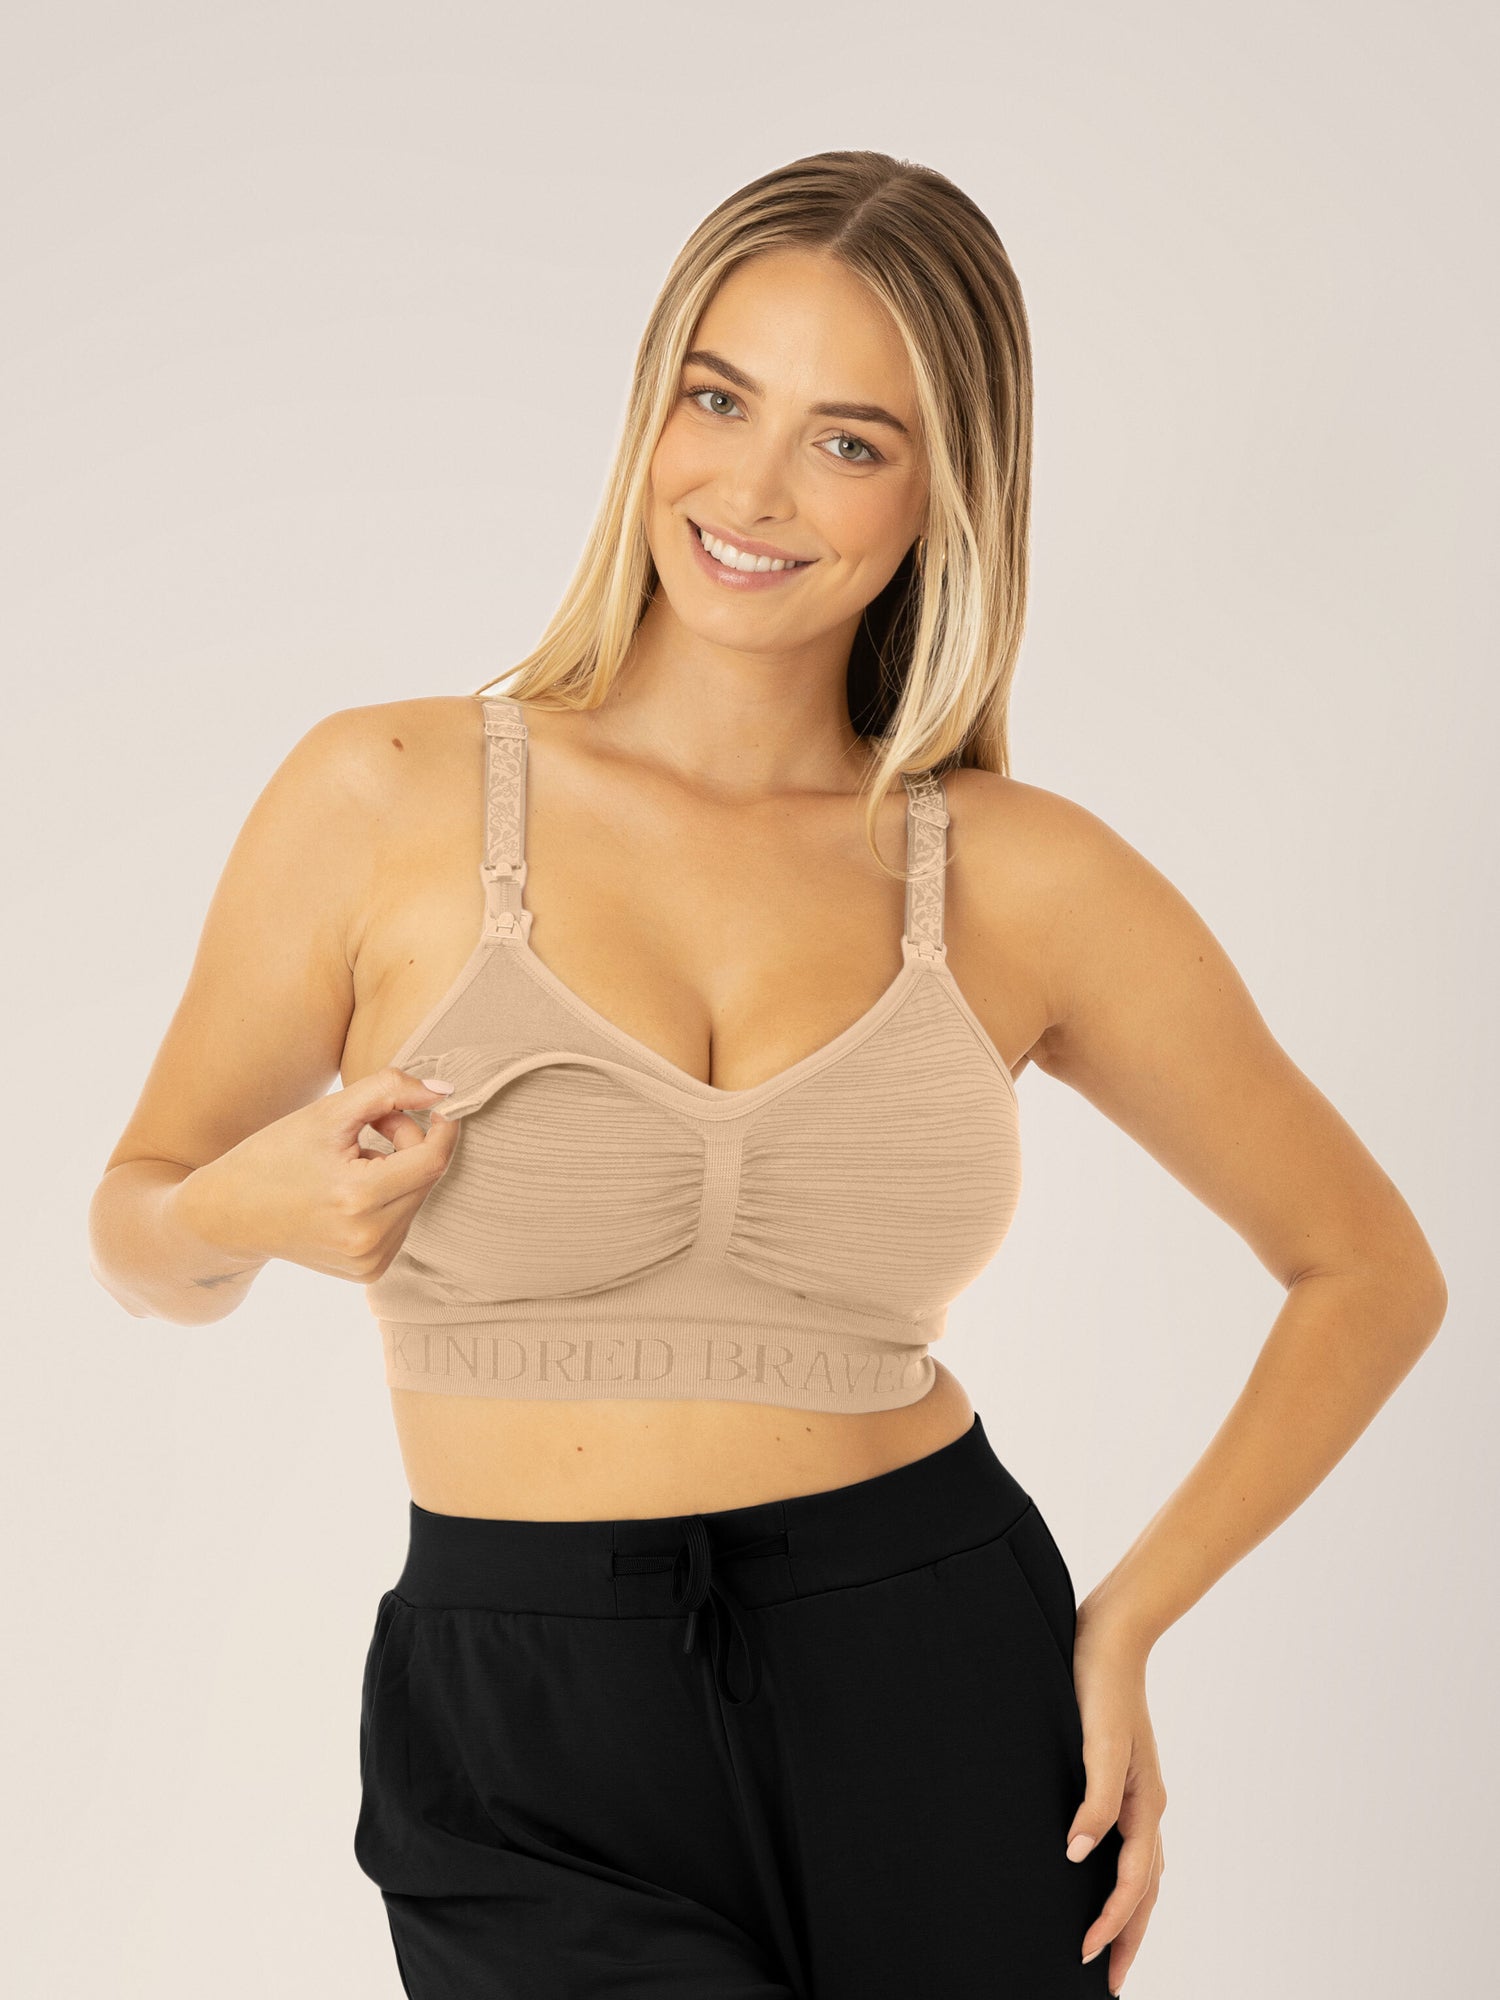 Momcozy Hands-Free Pumping Bra, Adjustable Breast-Pump Holding and Nursing  Bra for Spectra, Medela, Elvie, Willow and More